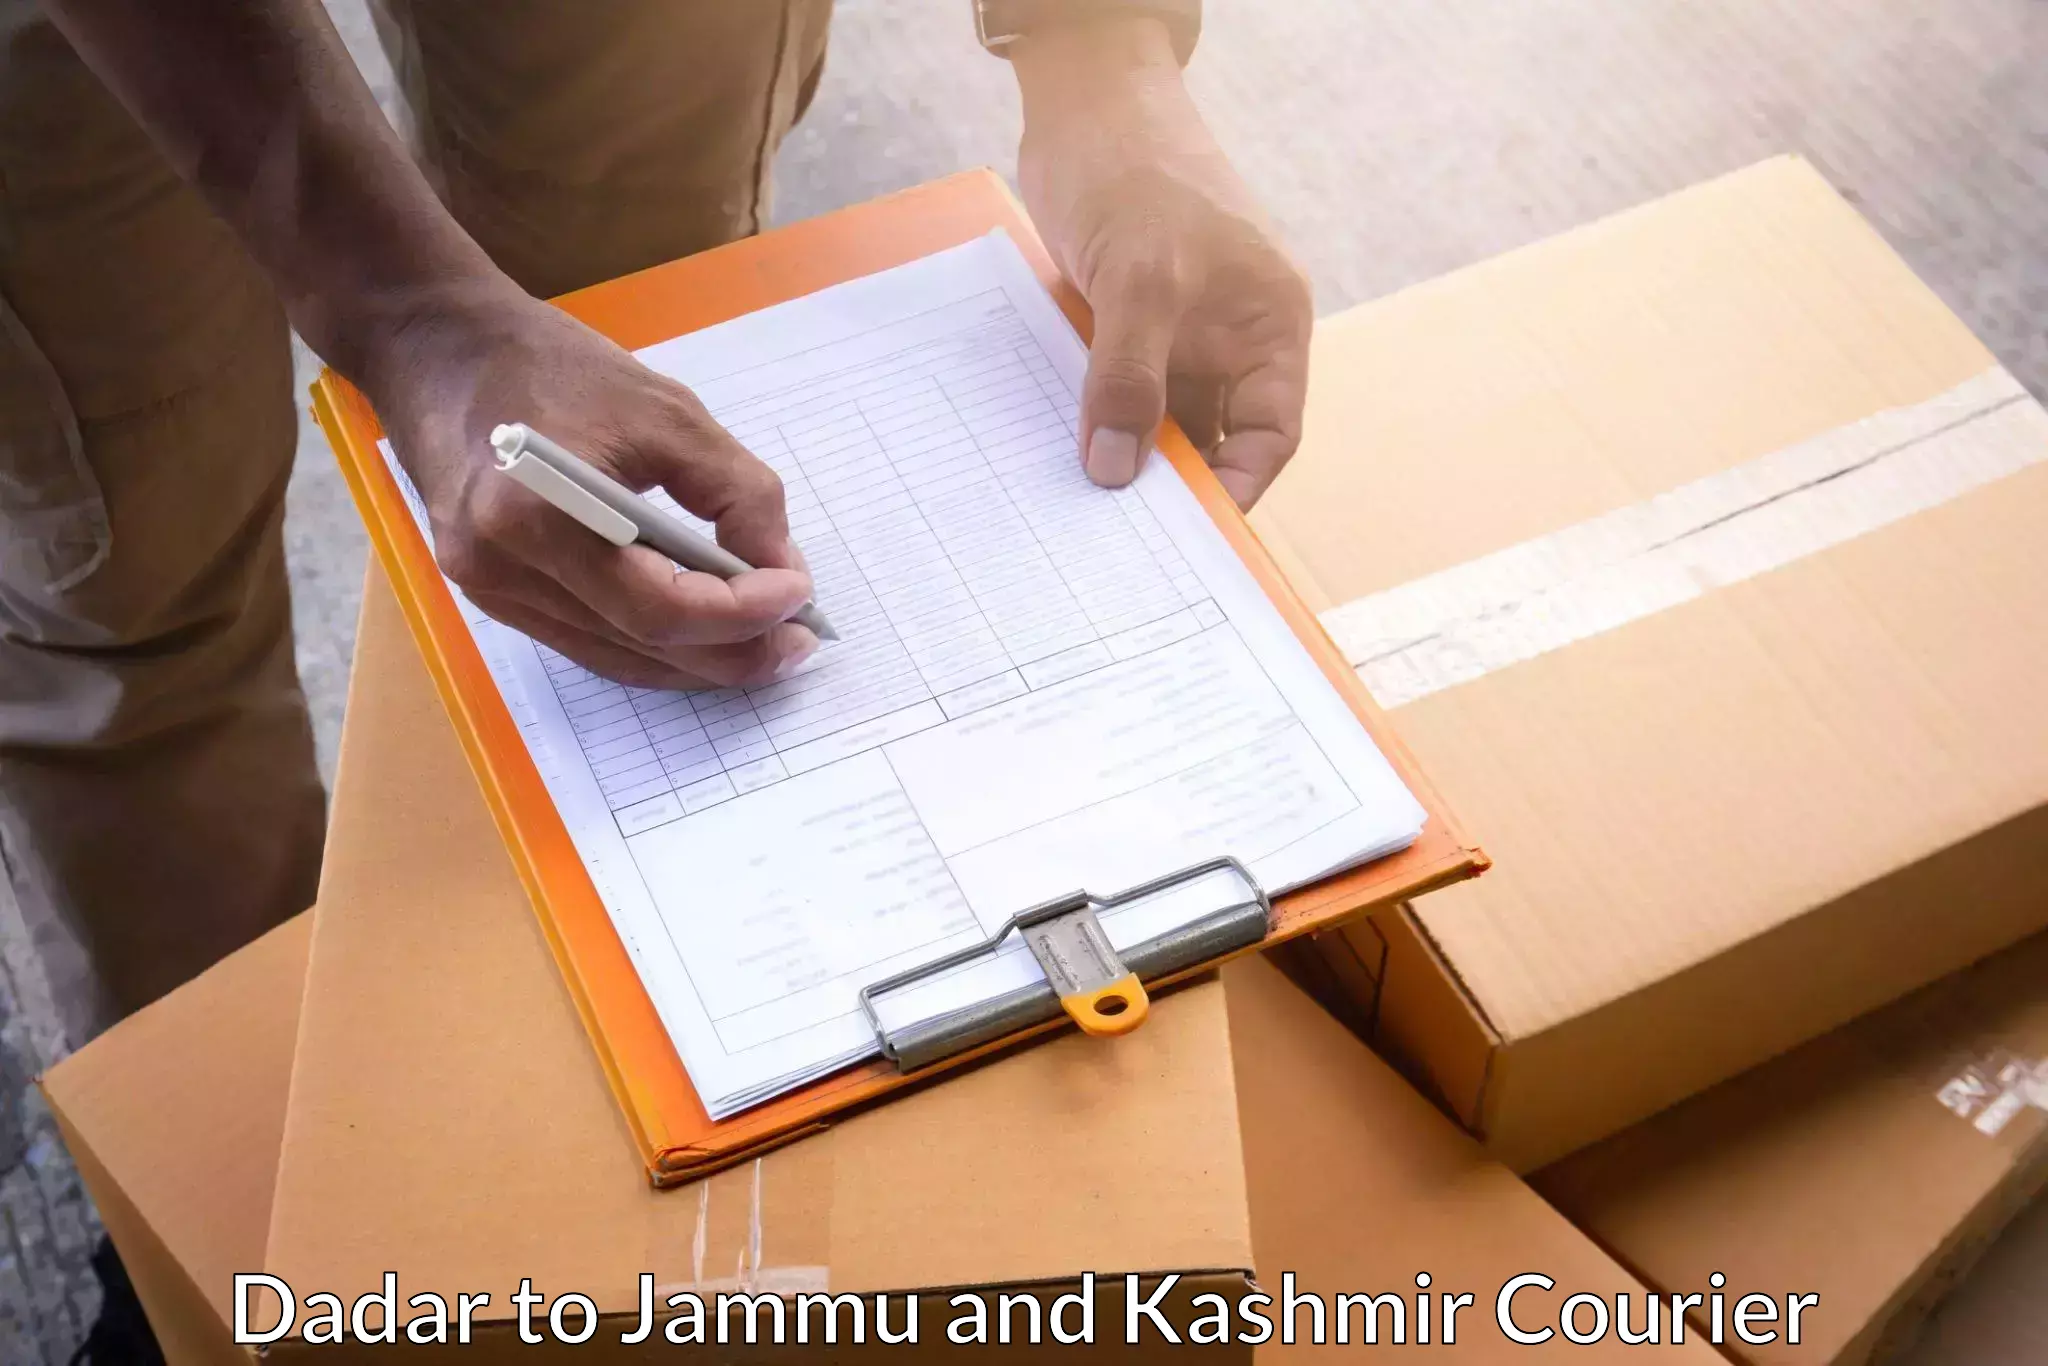 Sustainable courier practices Dadar to Jammu and Kashmir